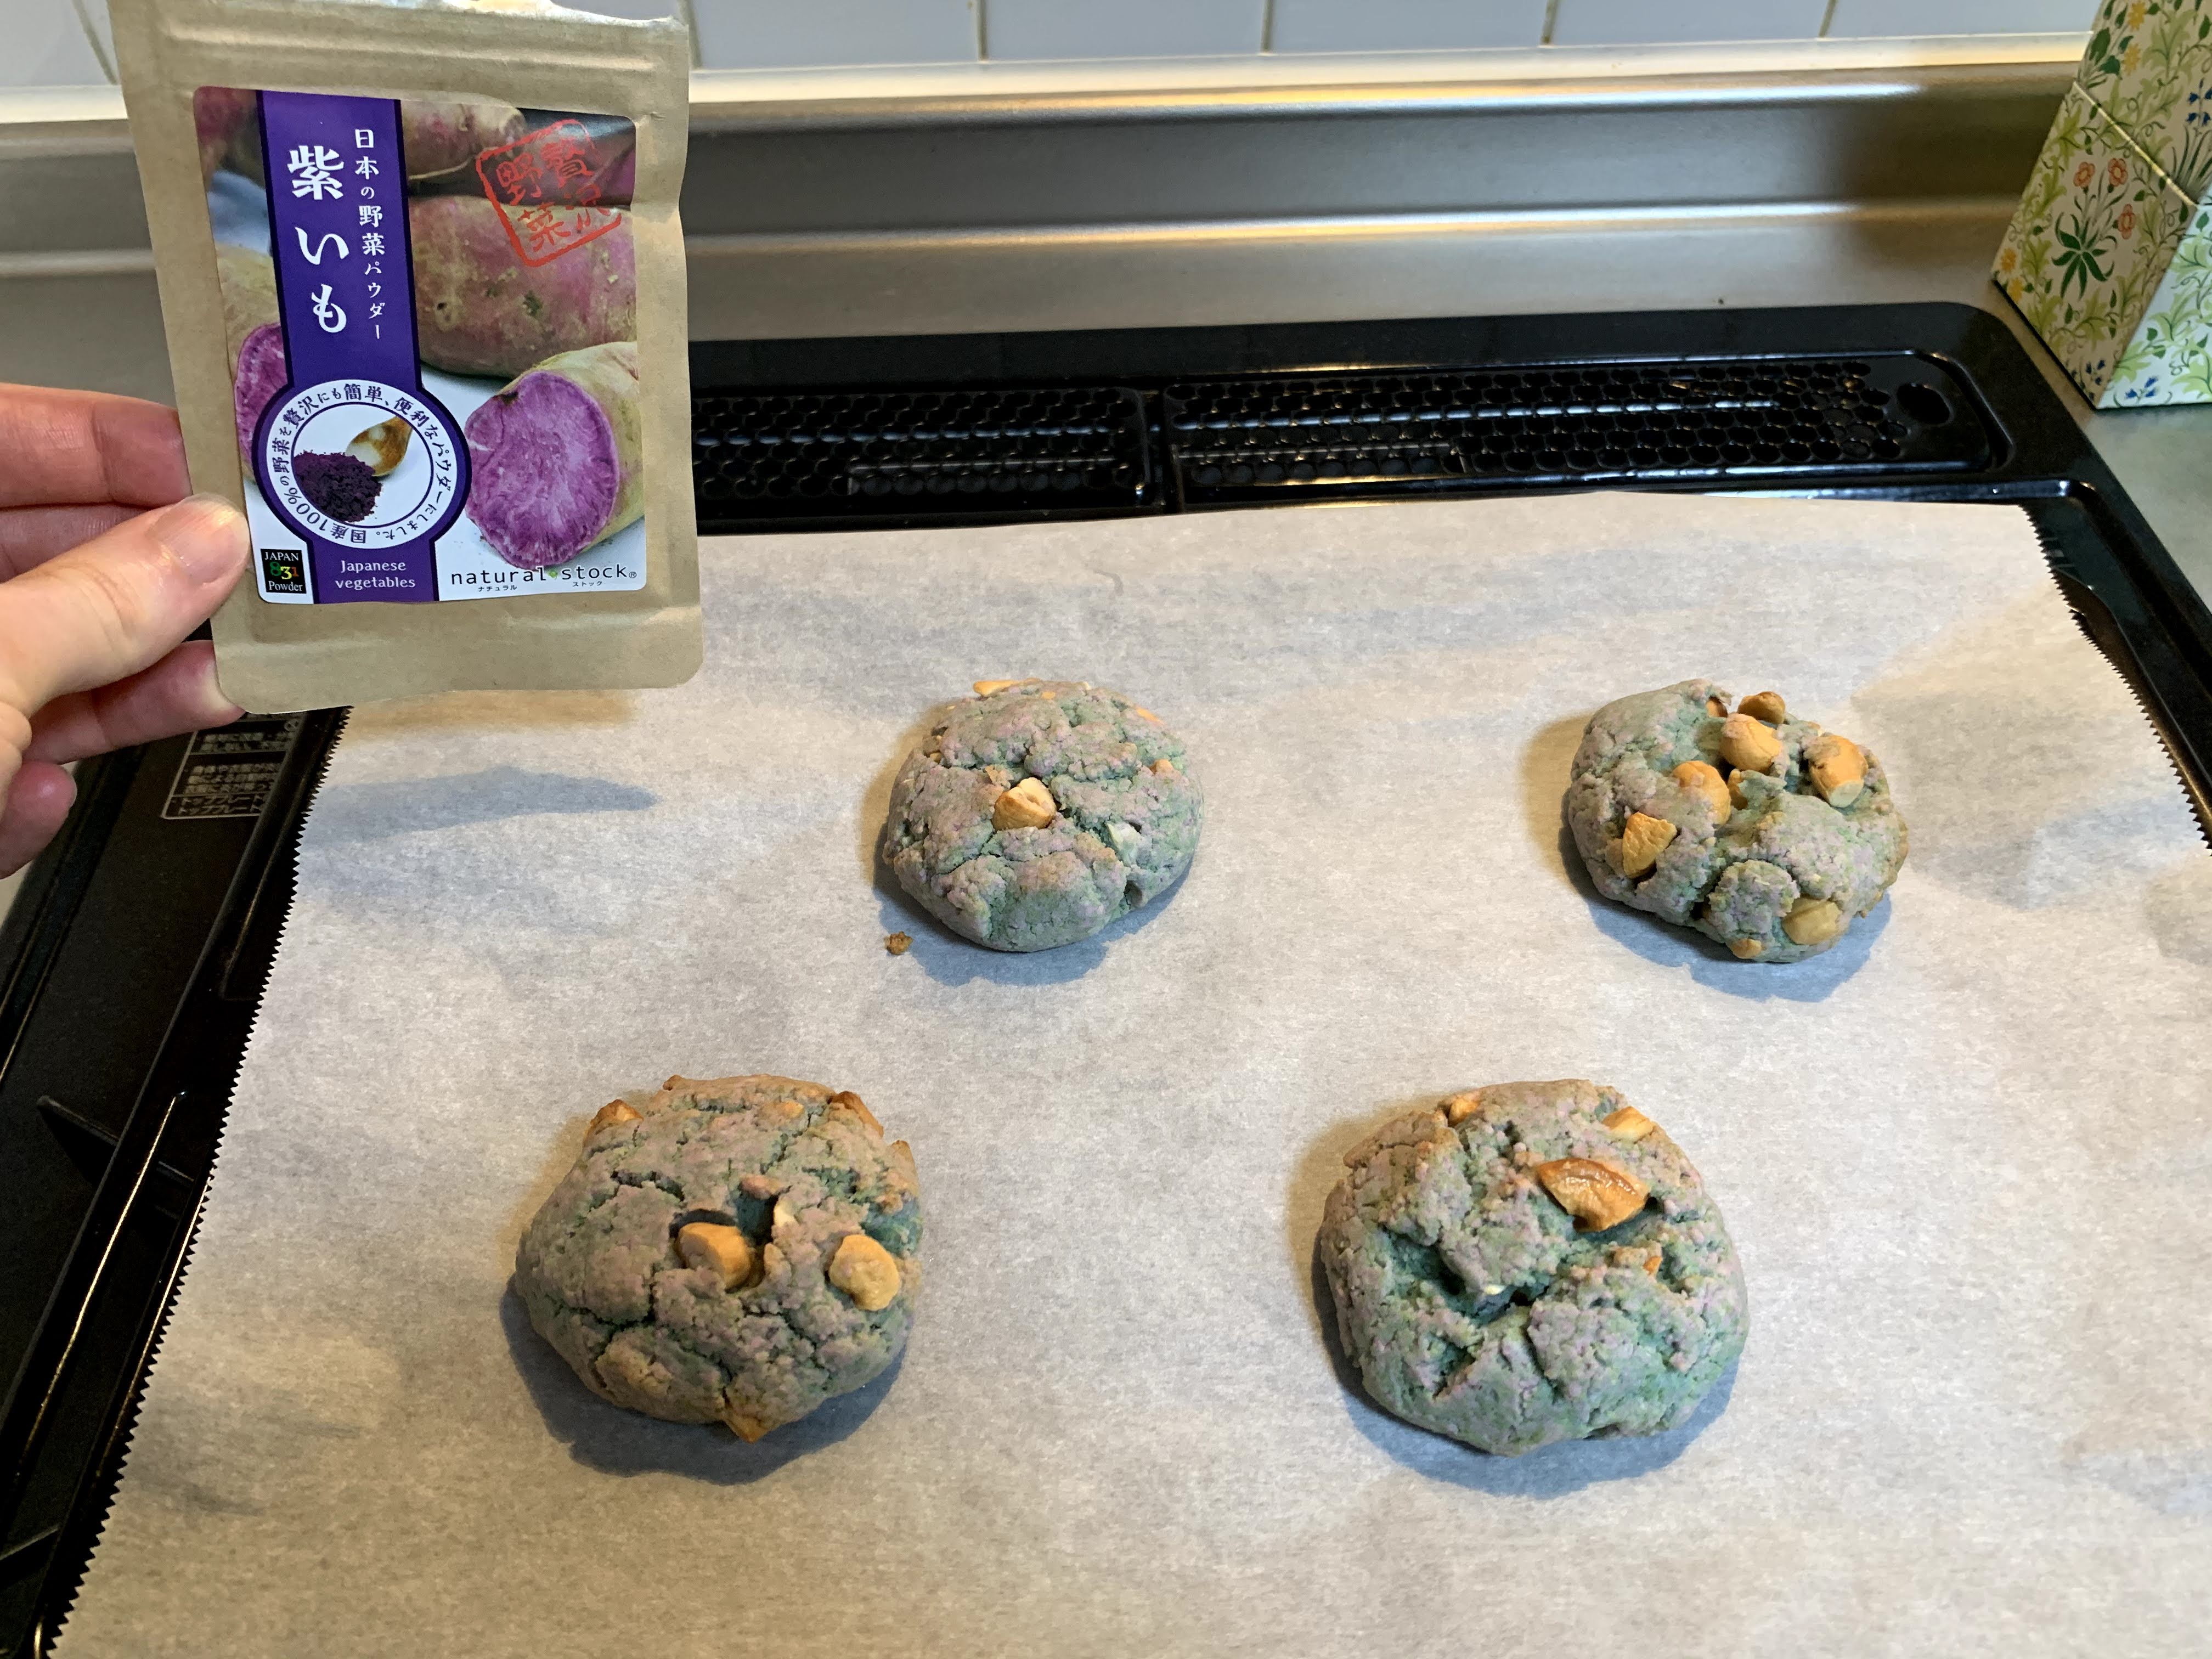 comparing baked blue biscuits and the original pink powder